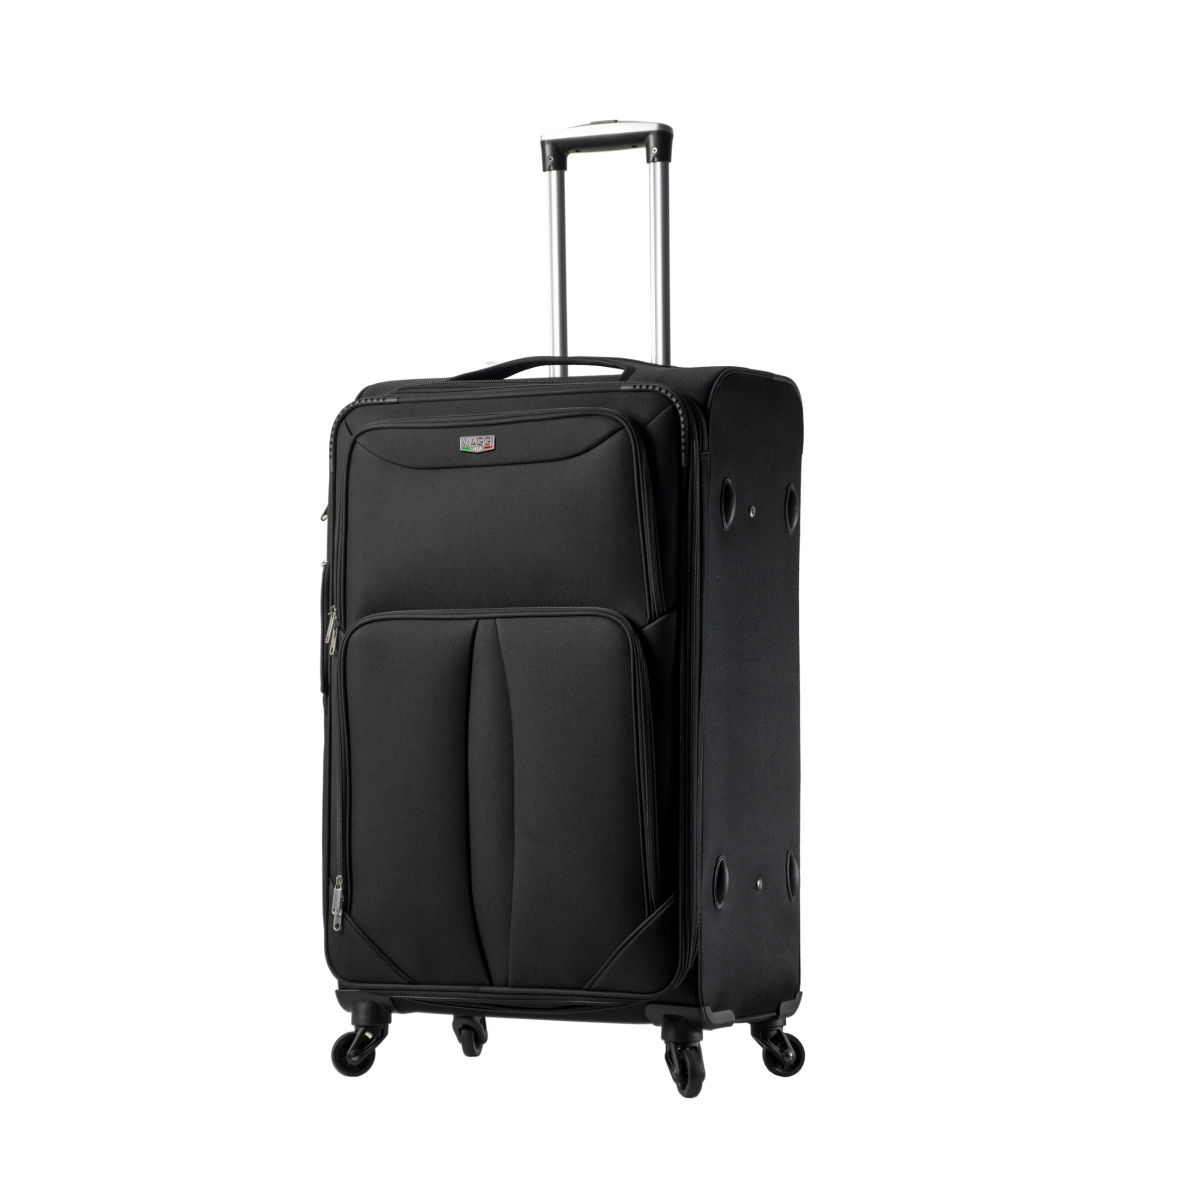 V1100-28in-blk Sione Softside 28 In. Spinner Carry-on, Black